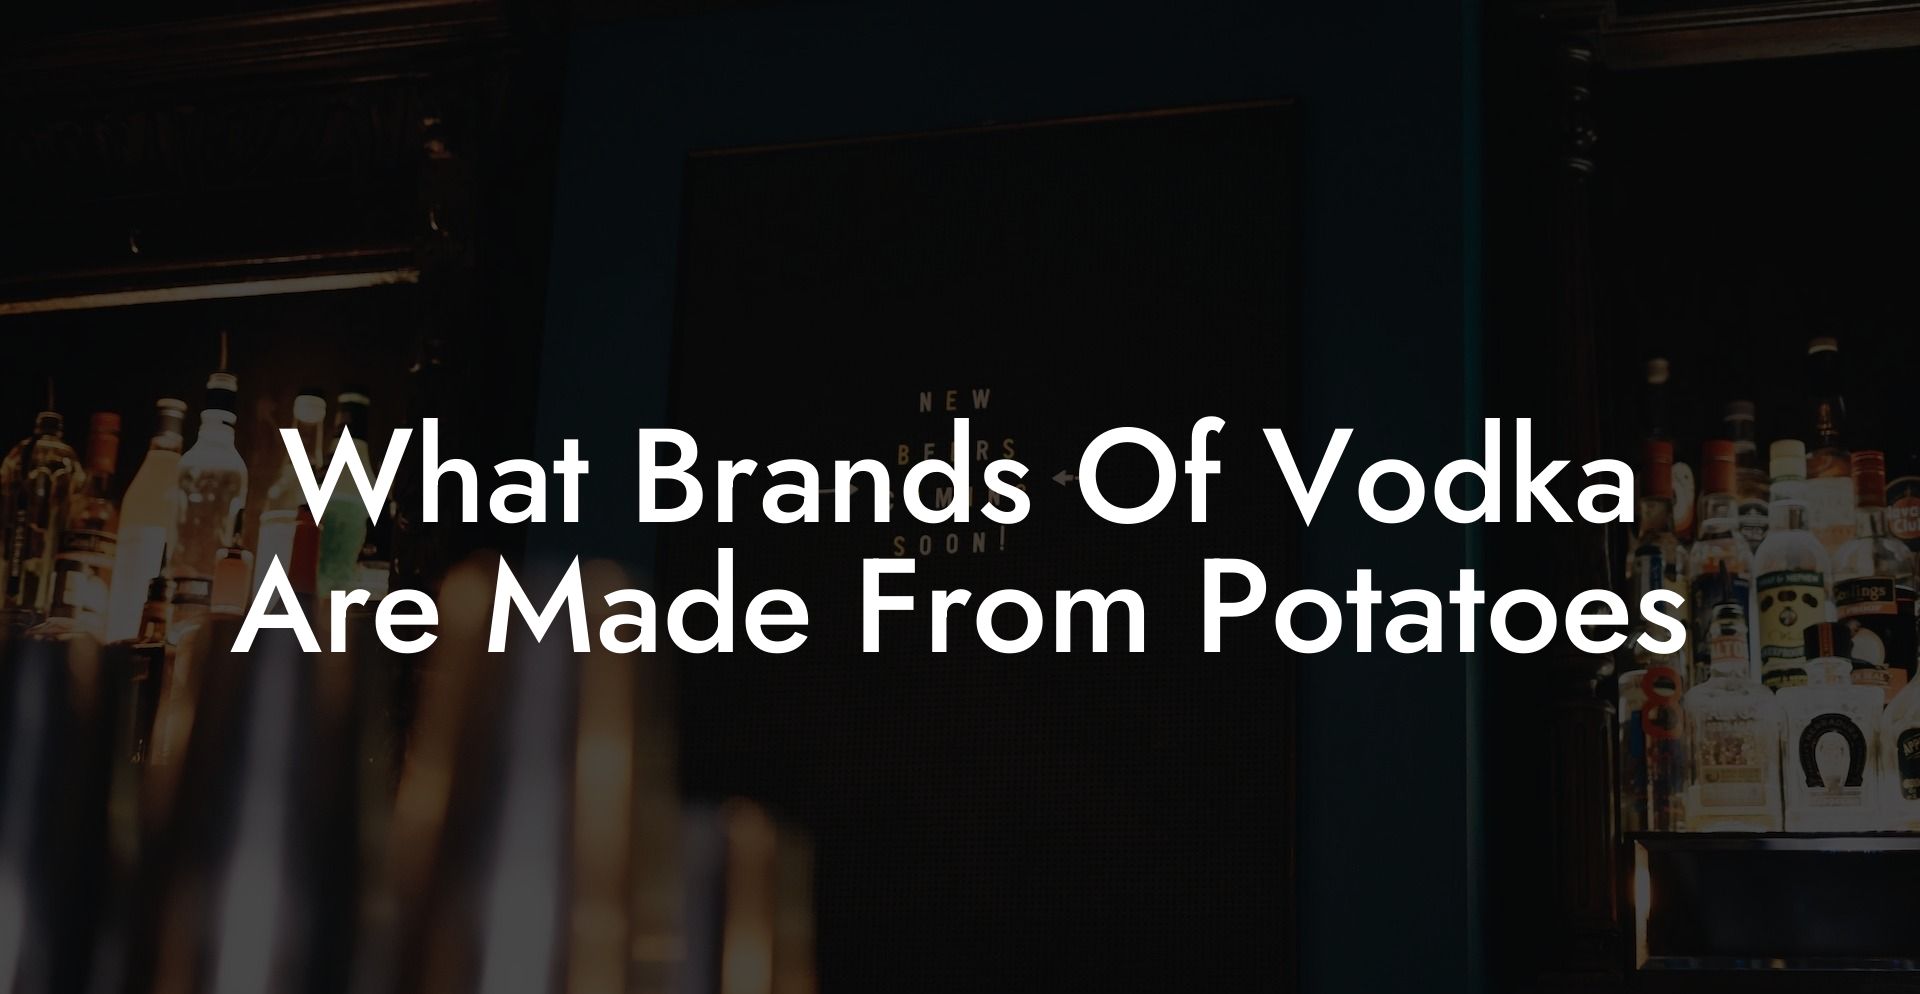 What Brands Of Vodka Are Made From Potatoes